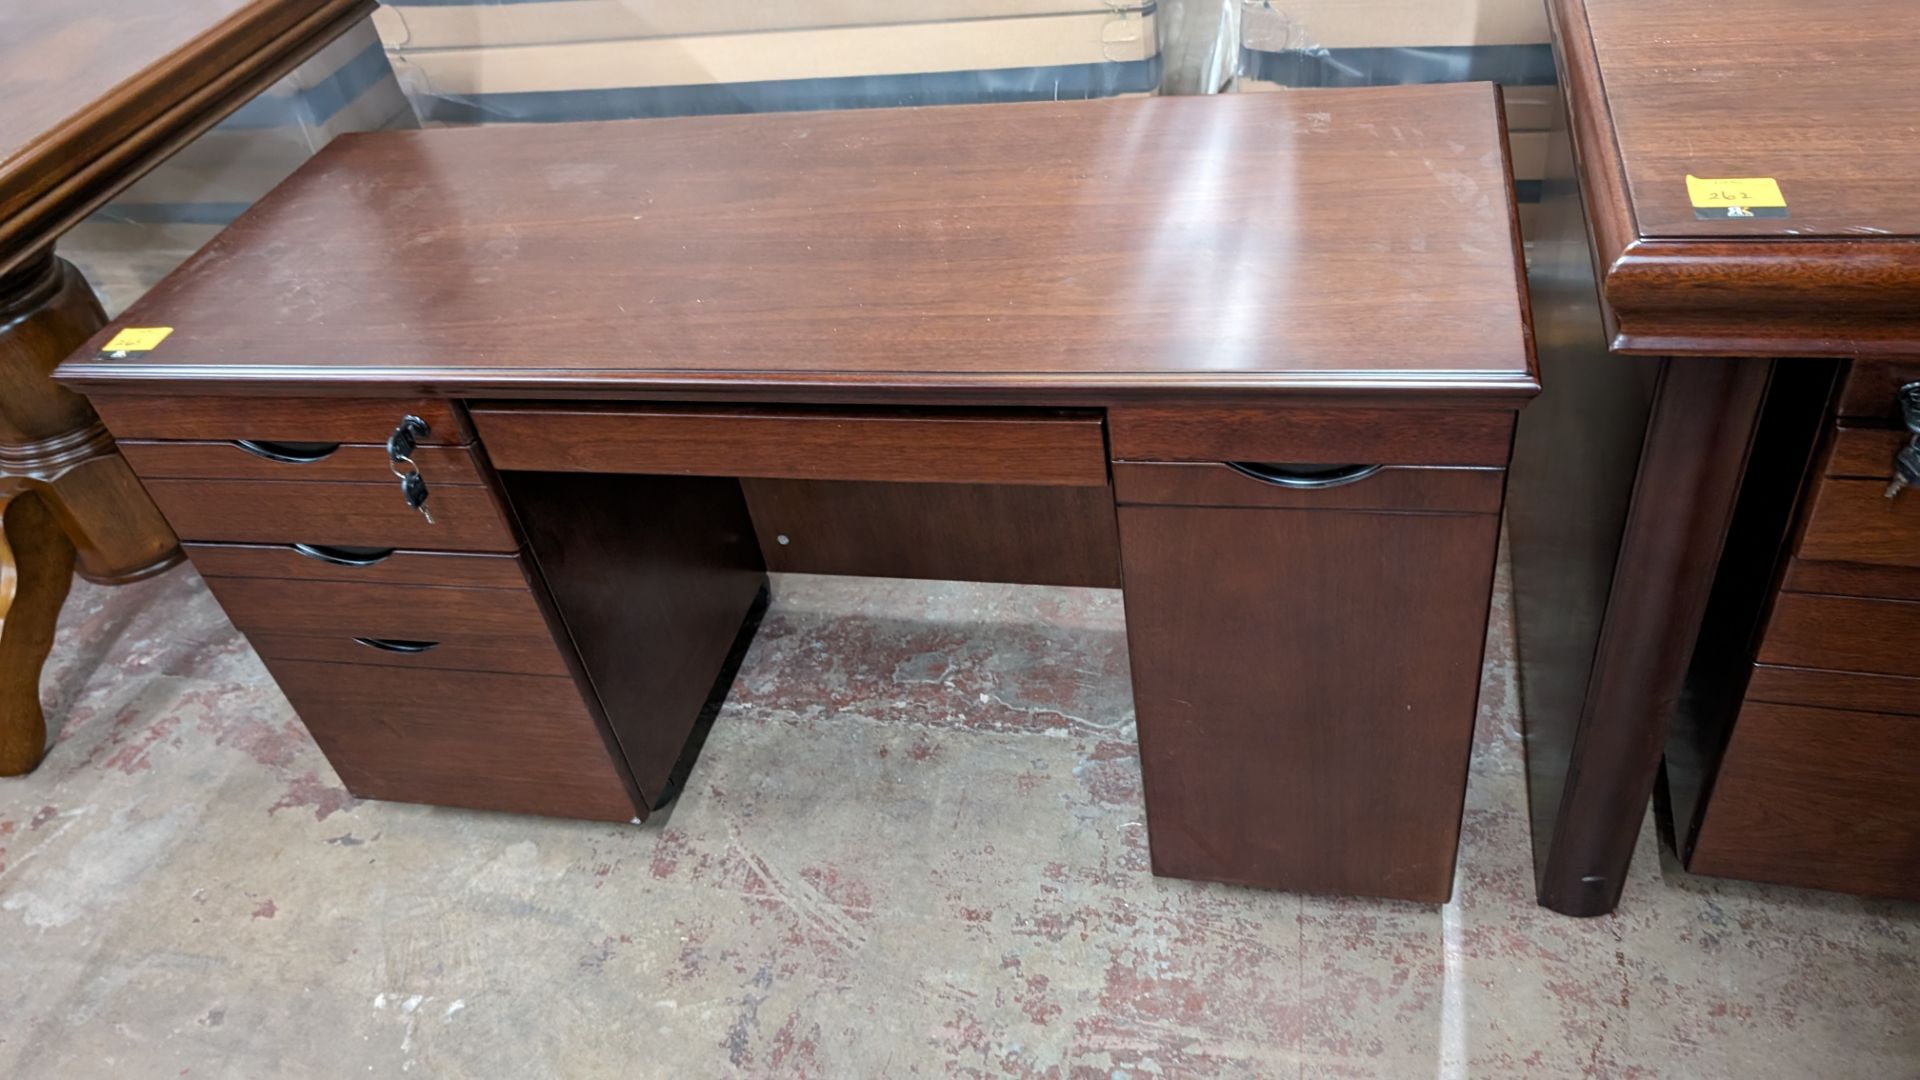 Small mahogany mobile desk with cupboard for computer to the right, drawer pack to the left and cent